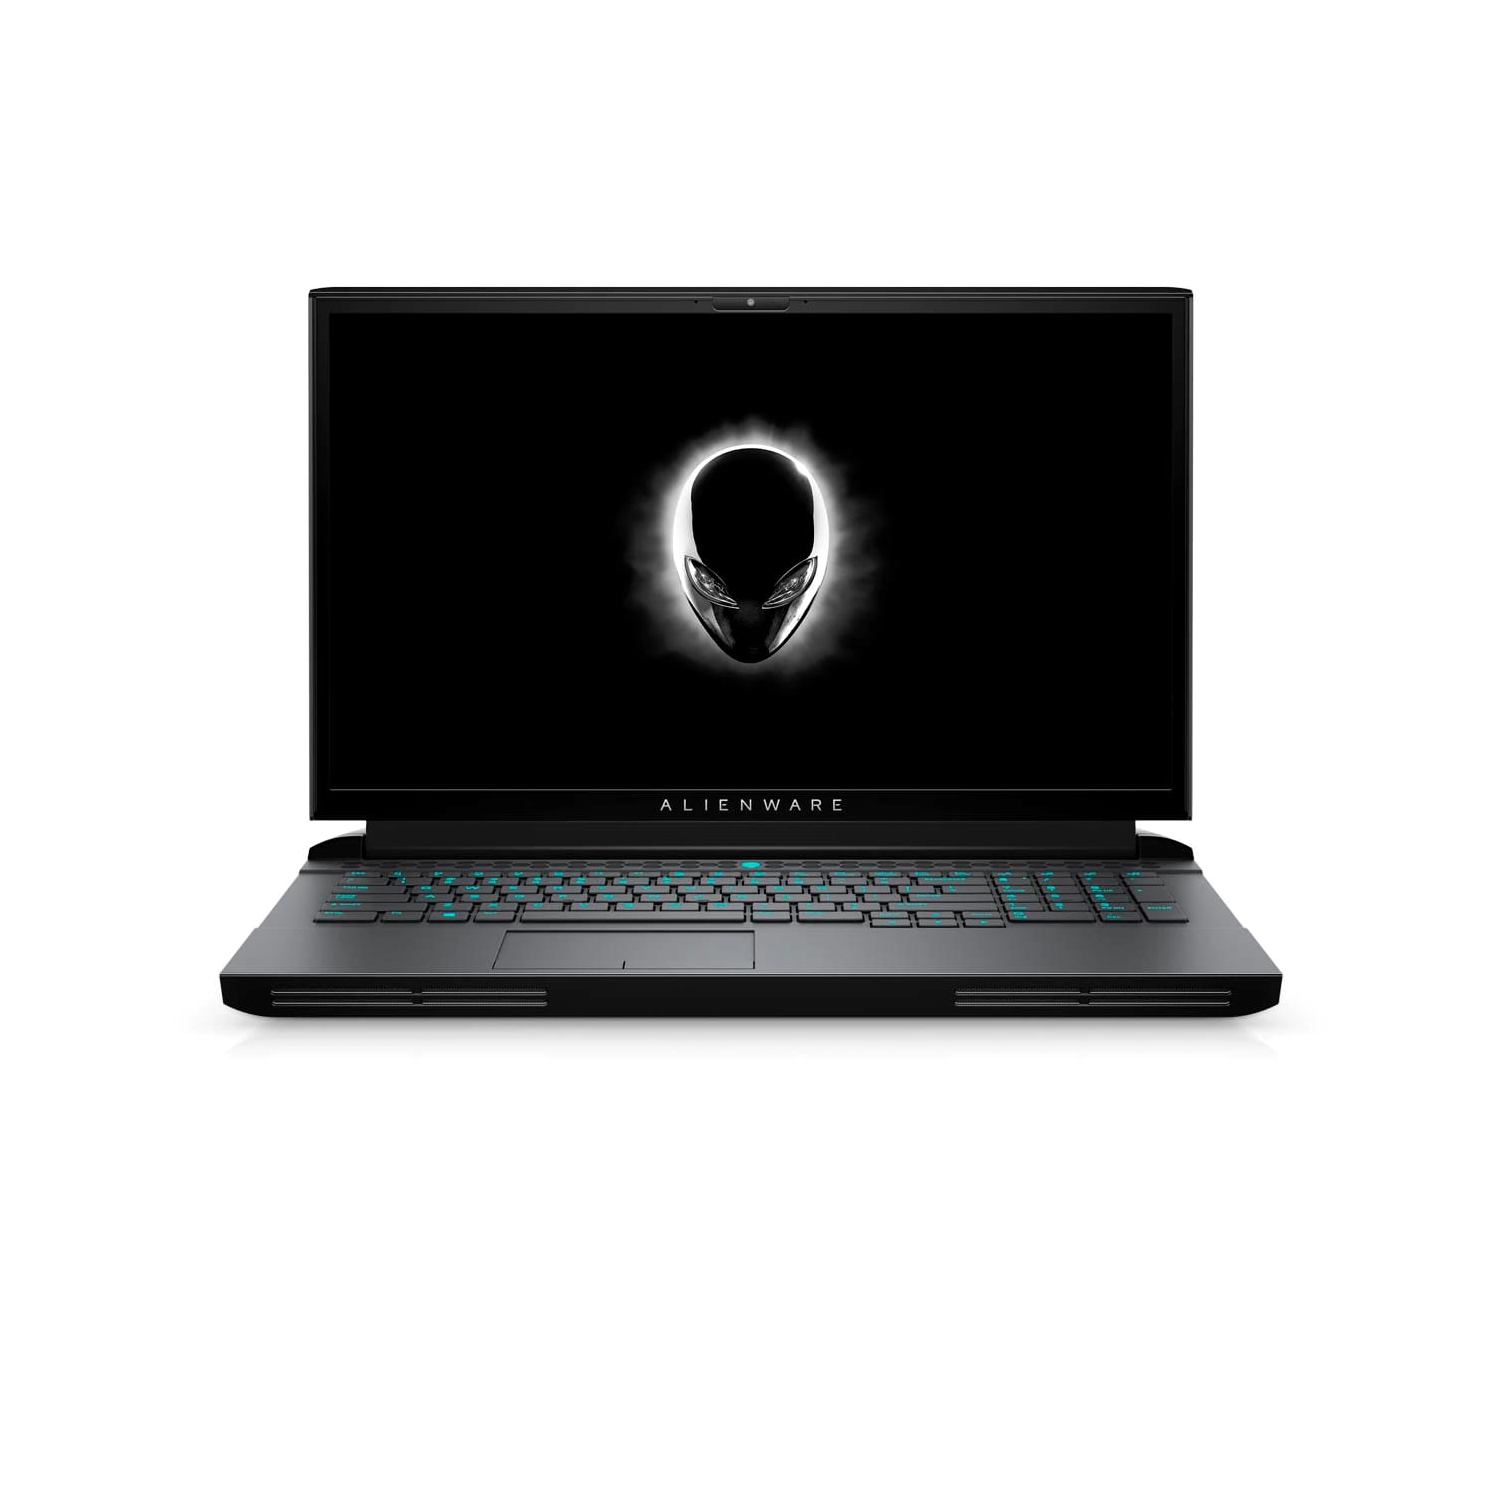 Refurbished (Excellent) - Dell Alienware 17 51m R2 Gaming Laptop (2020), 17.3" FHD, Core i7, 1TB HDD + 512GB SSD, 16GB RAM, 2070 Super, 4.8 GHz, 10th Gen CPU Certified